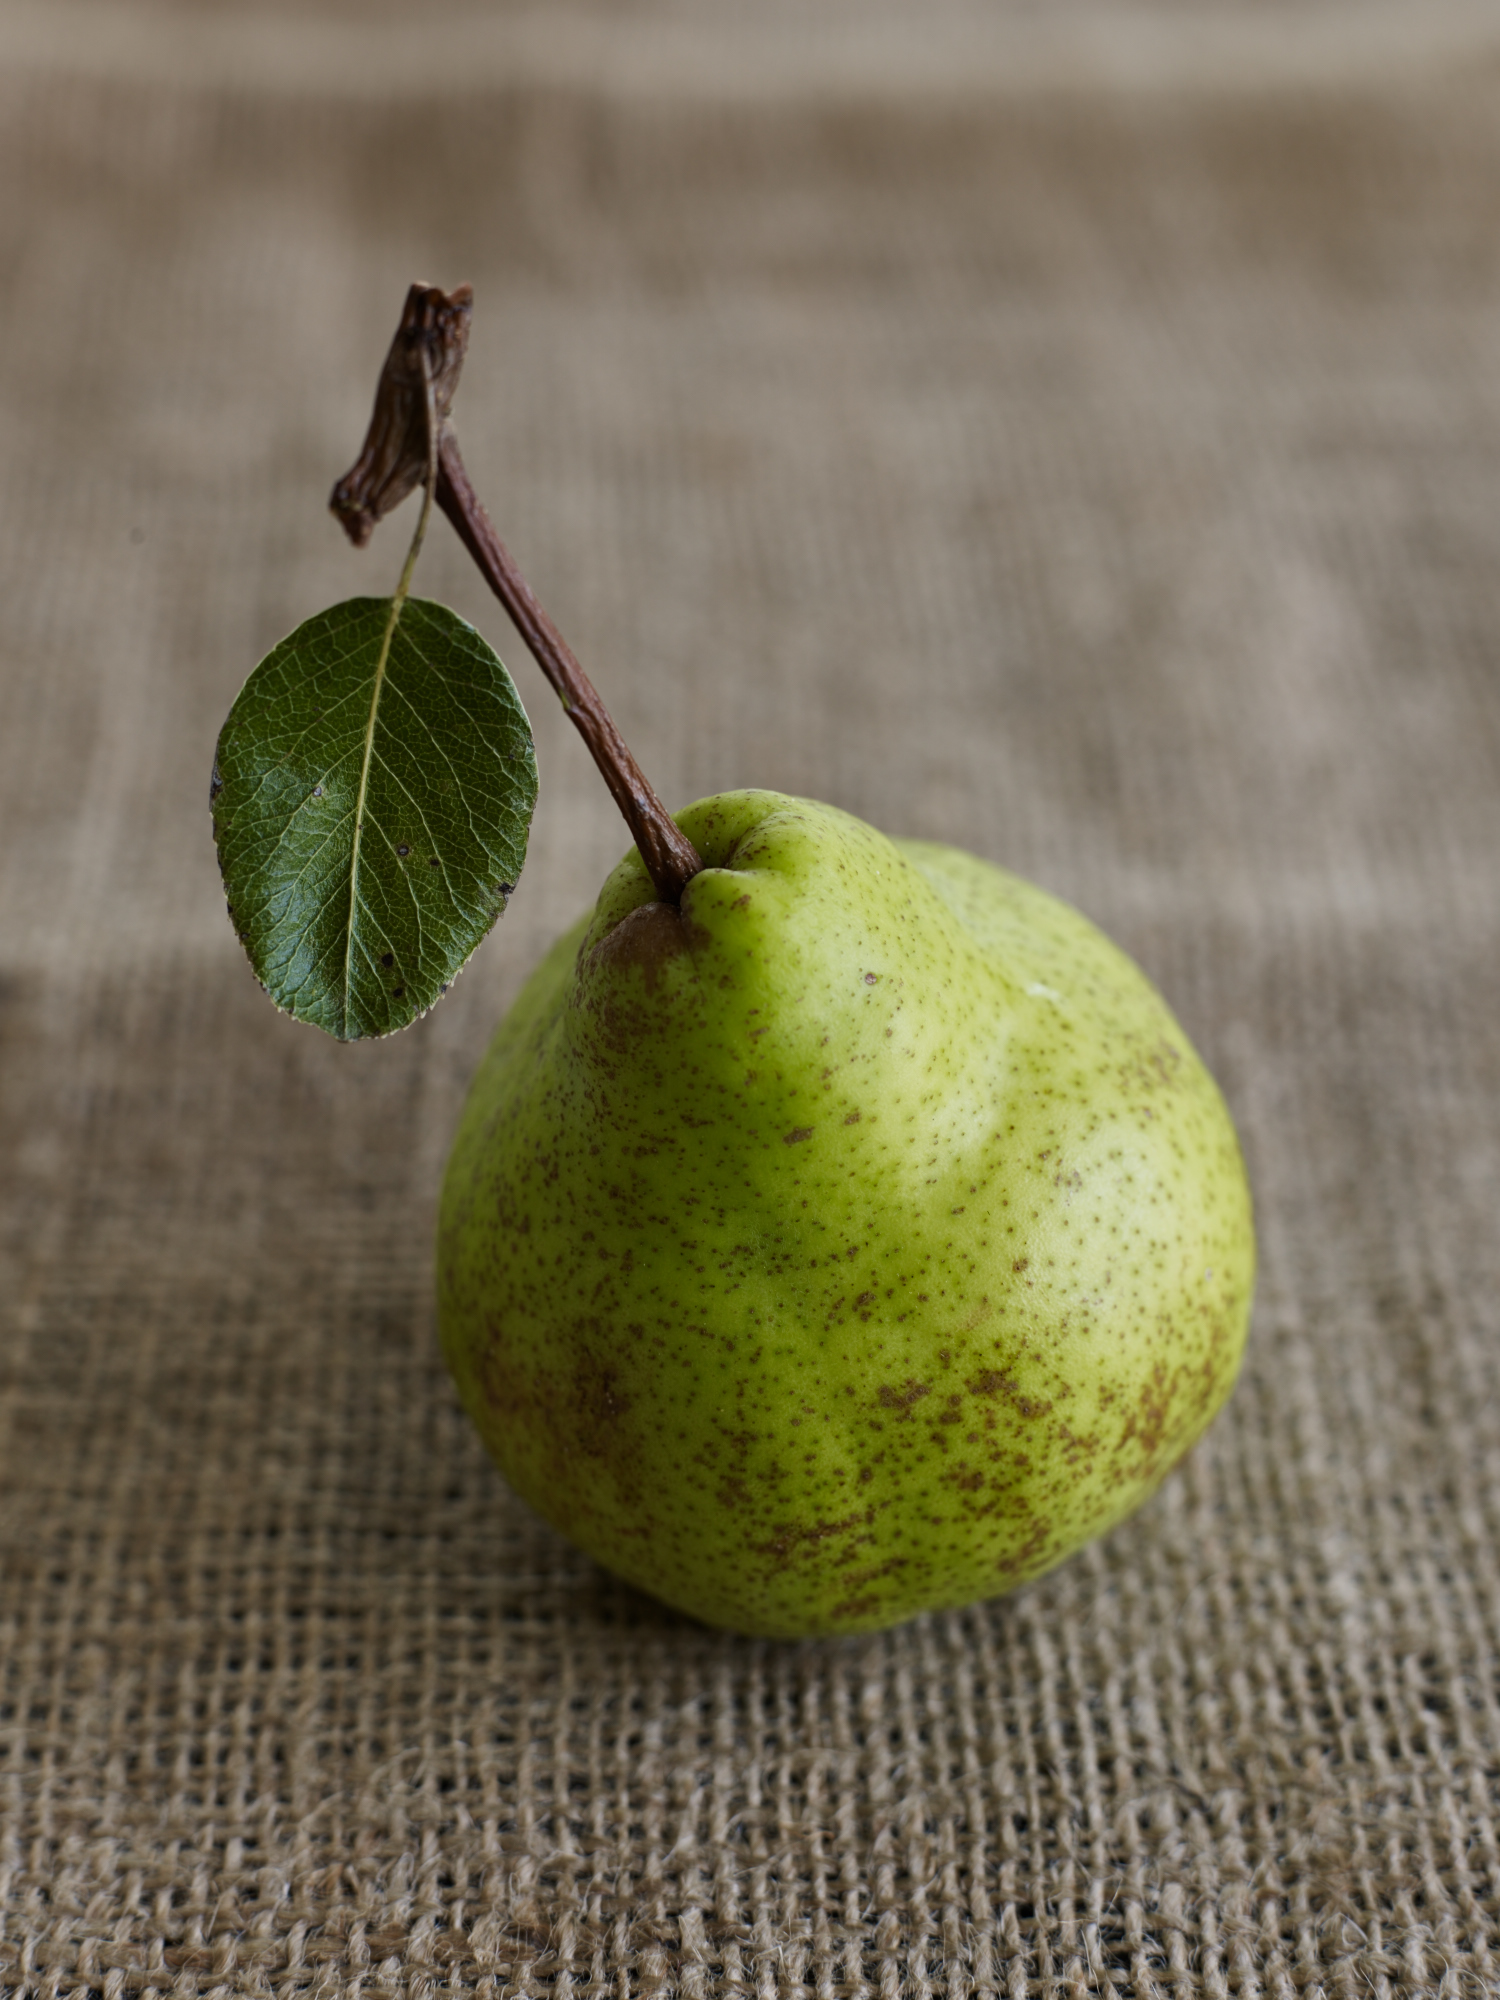 Pear with leaf